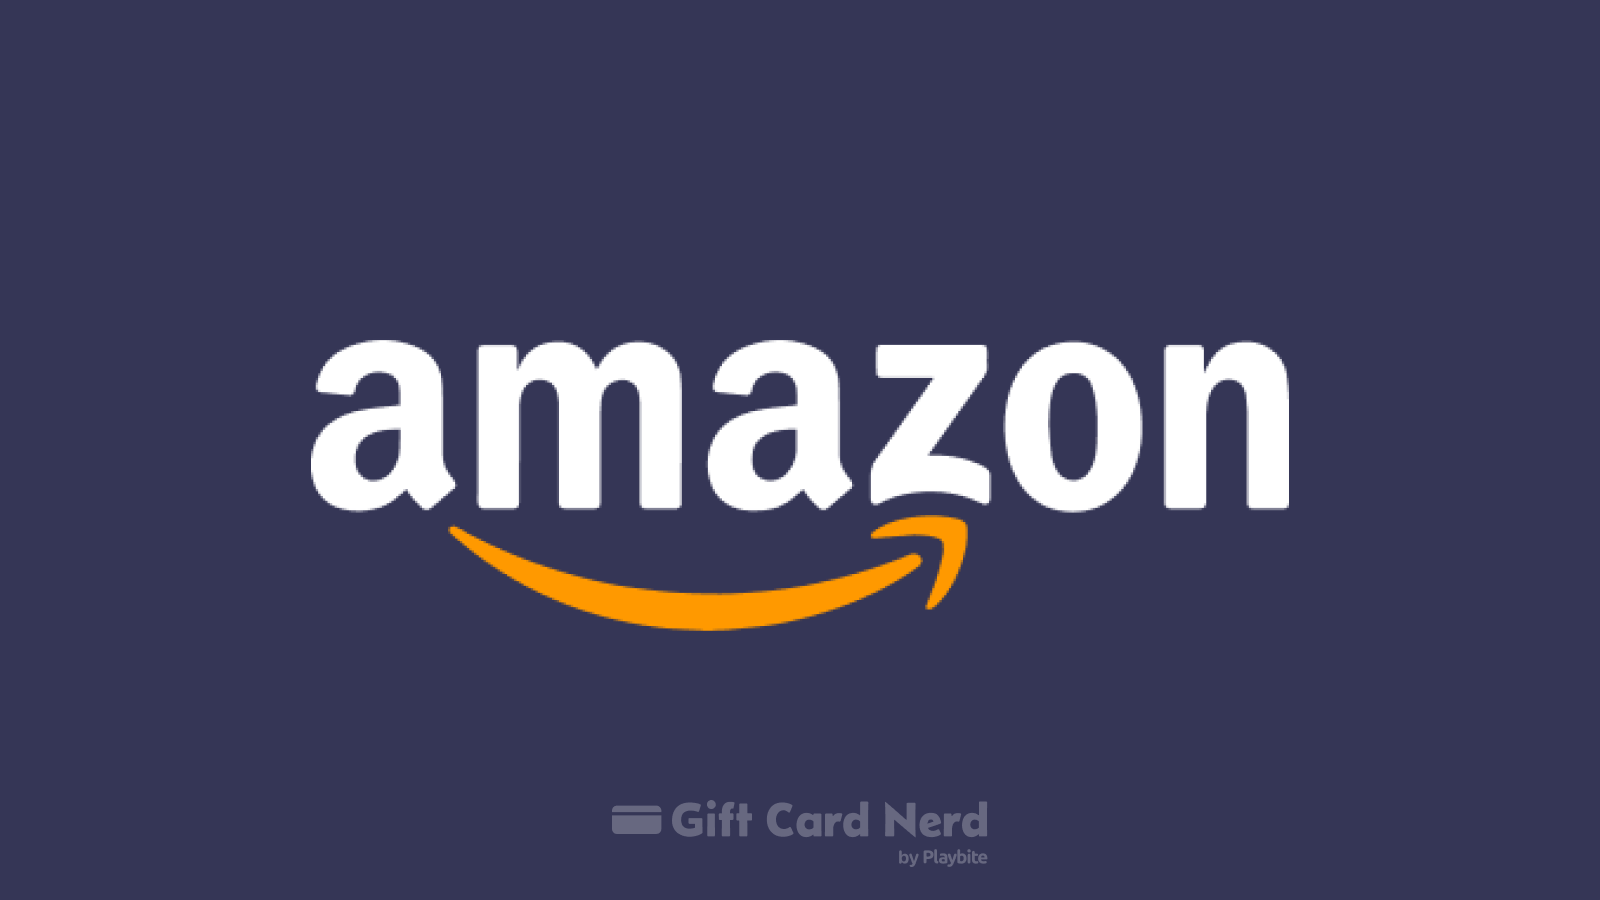 Does Game Stop Sell Amazon Gift Cards?